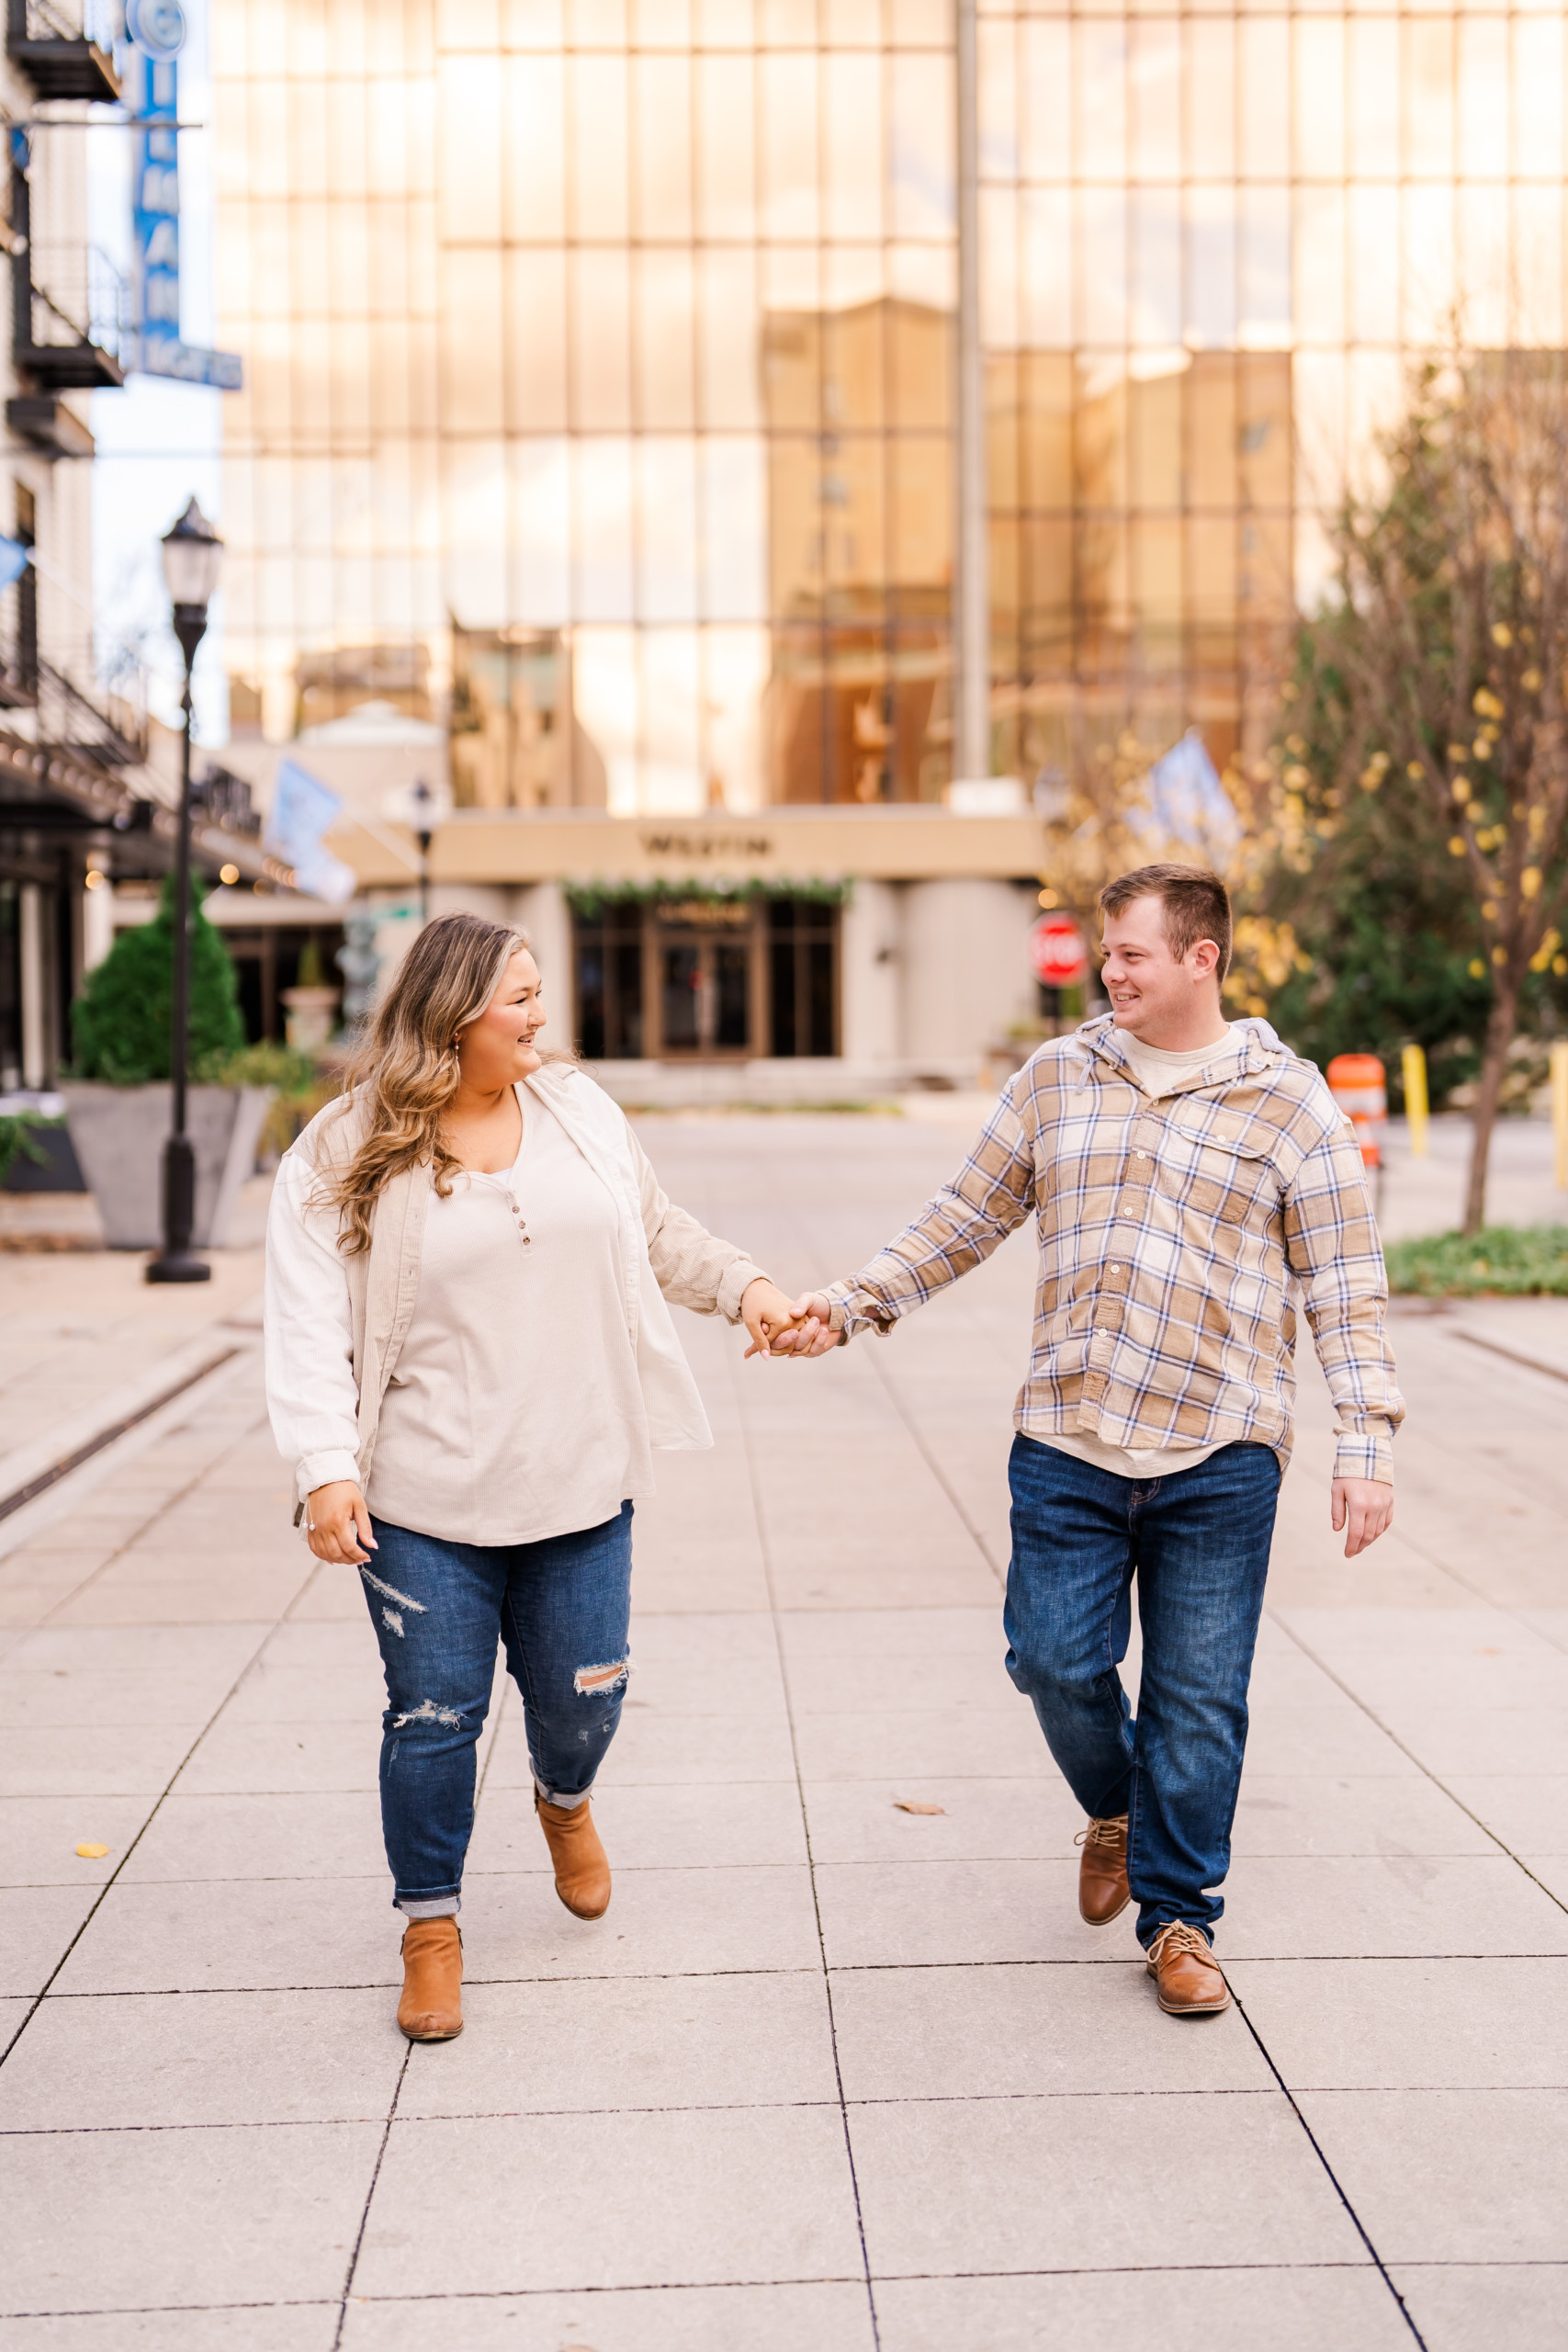 Hand in Hand Downtown Chattanooga Engagement